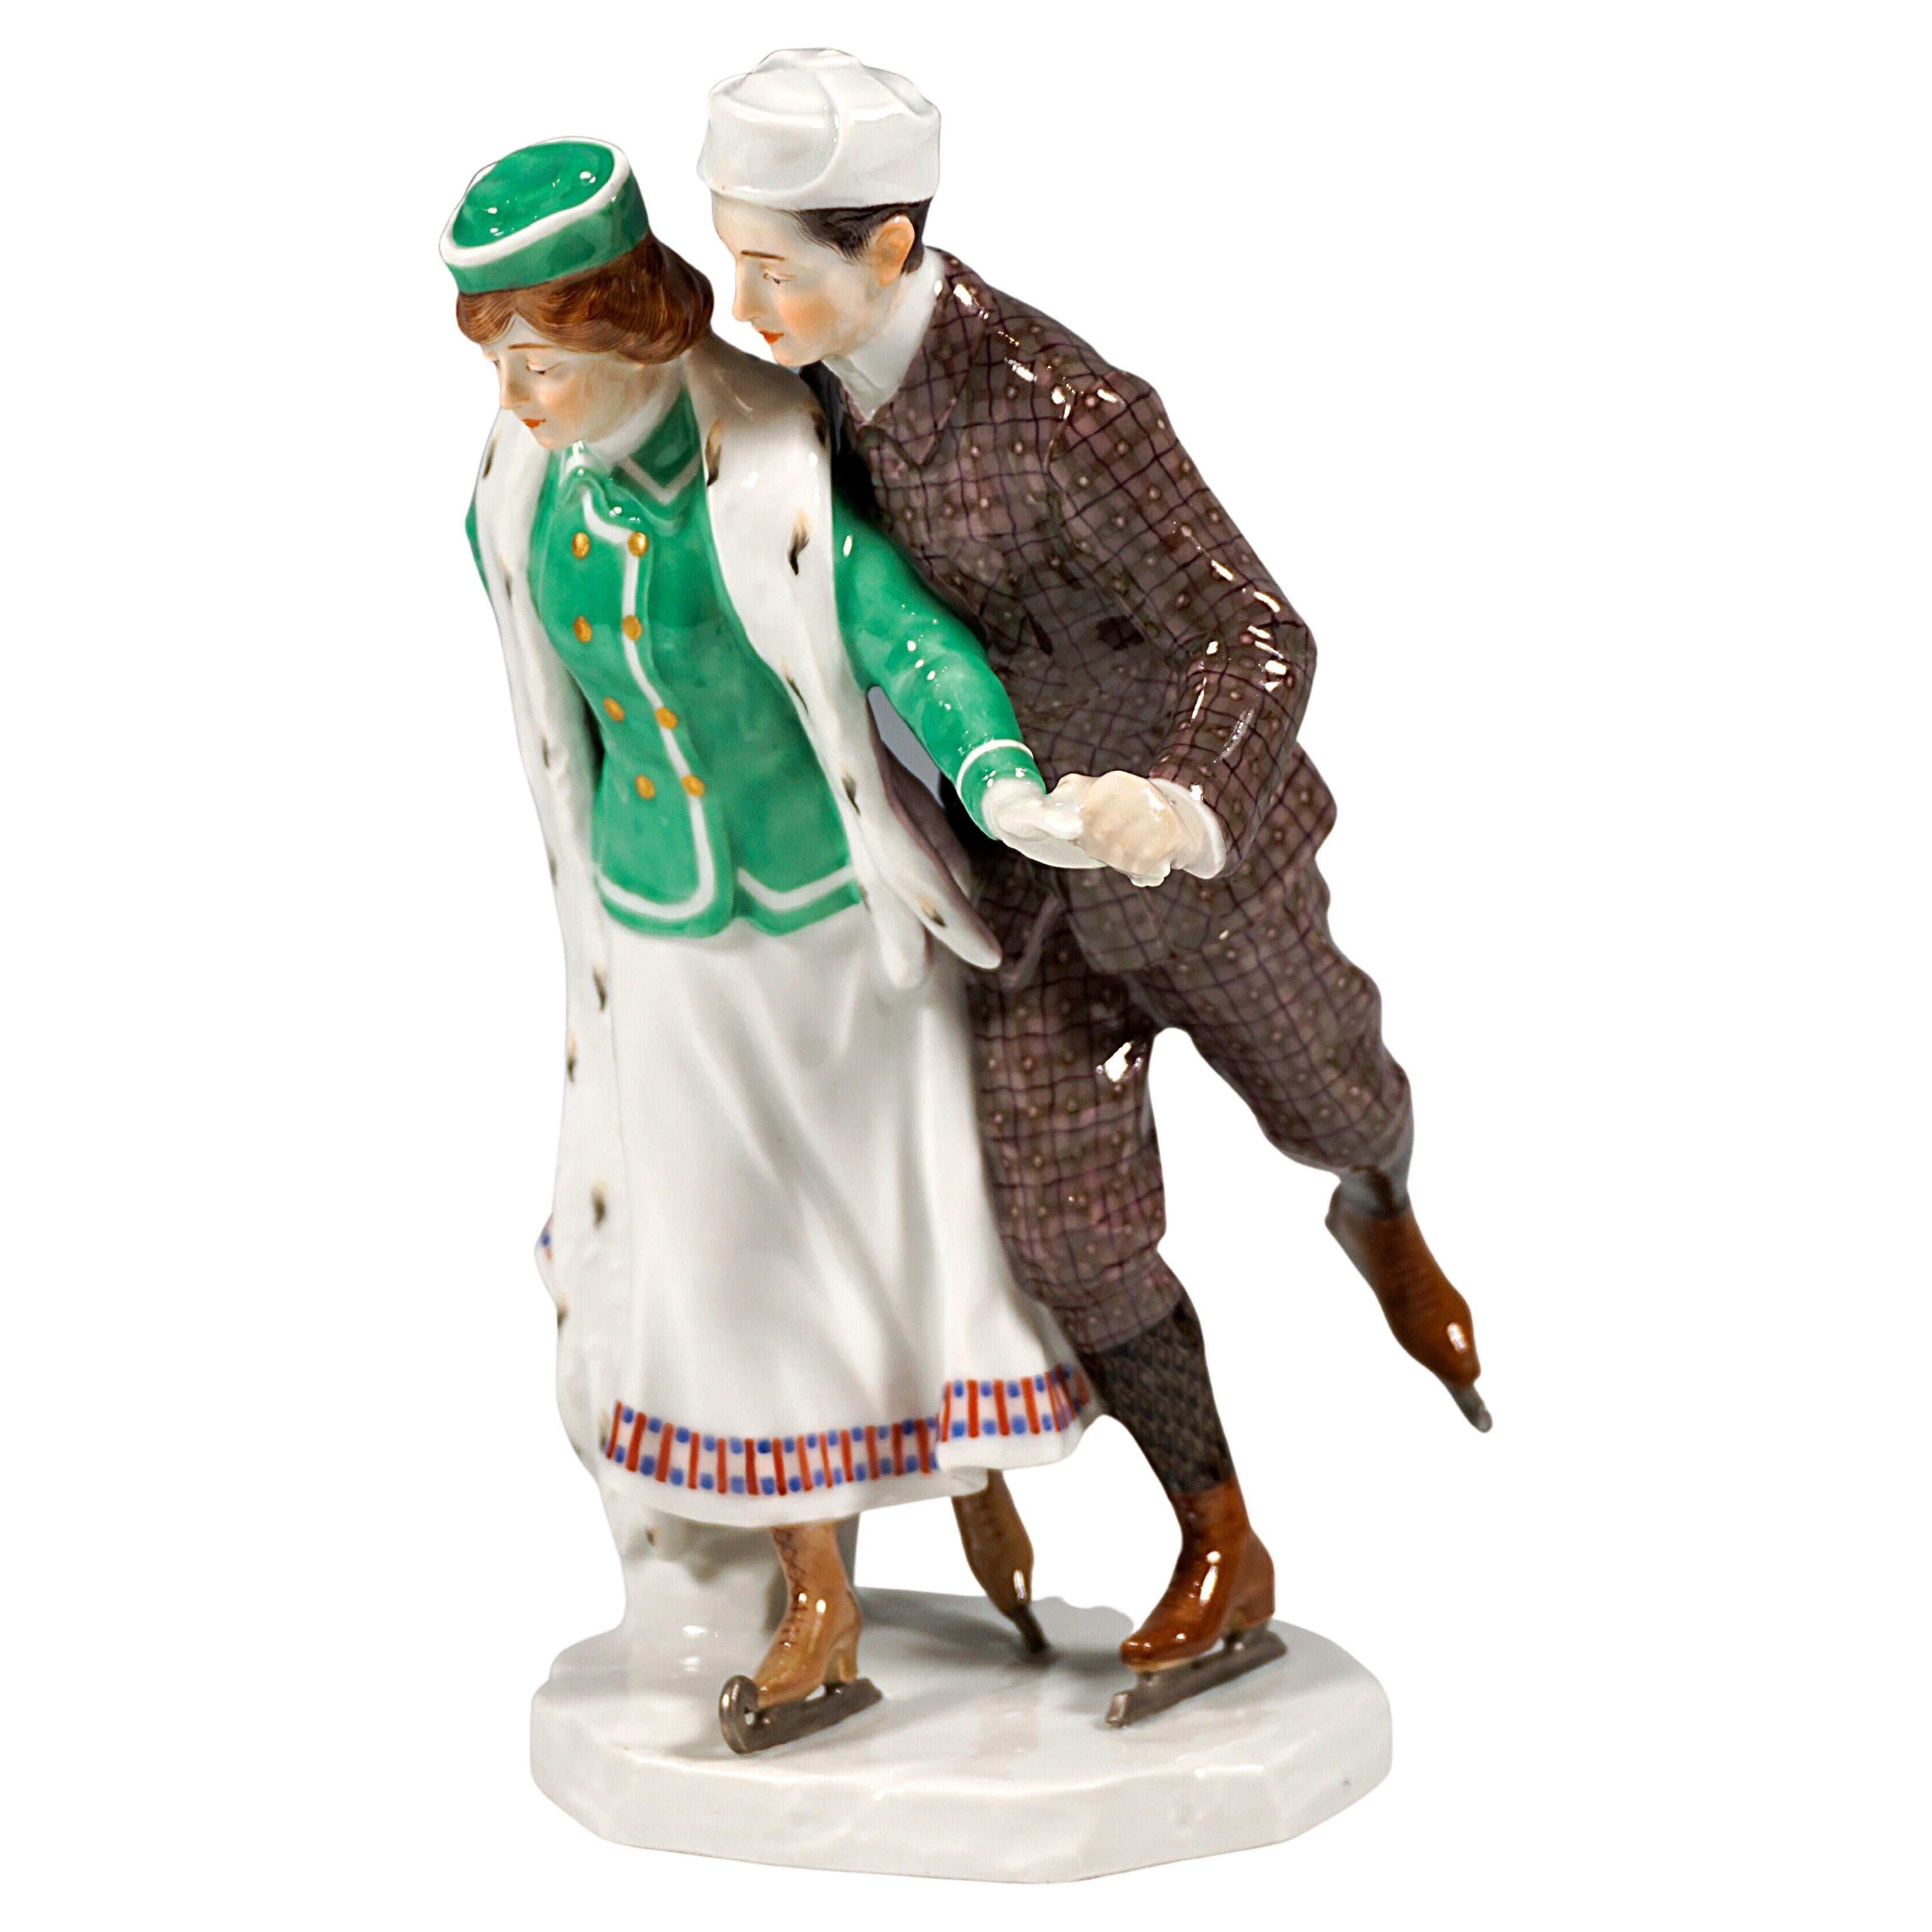 Art Nouveau Figure Group 'Ice-Scater', by Alfred Koenig, Meissen Germany, 1910